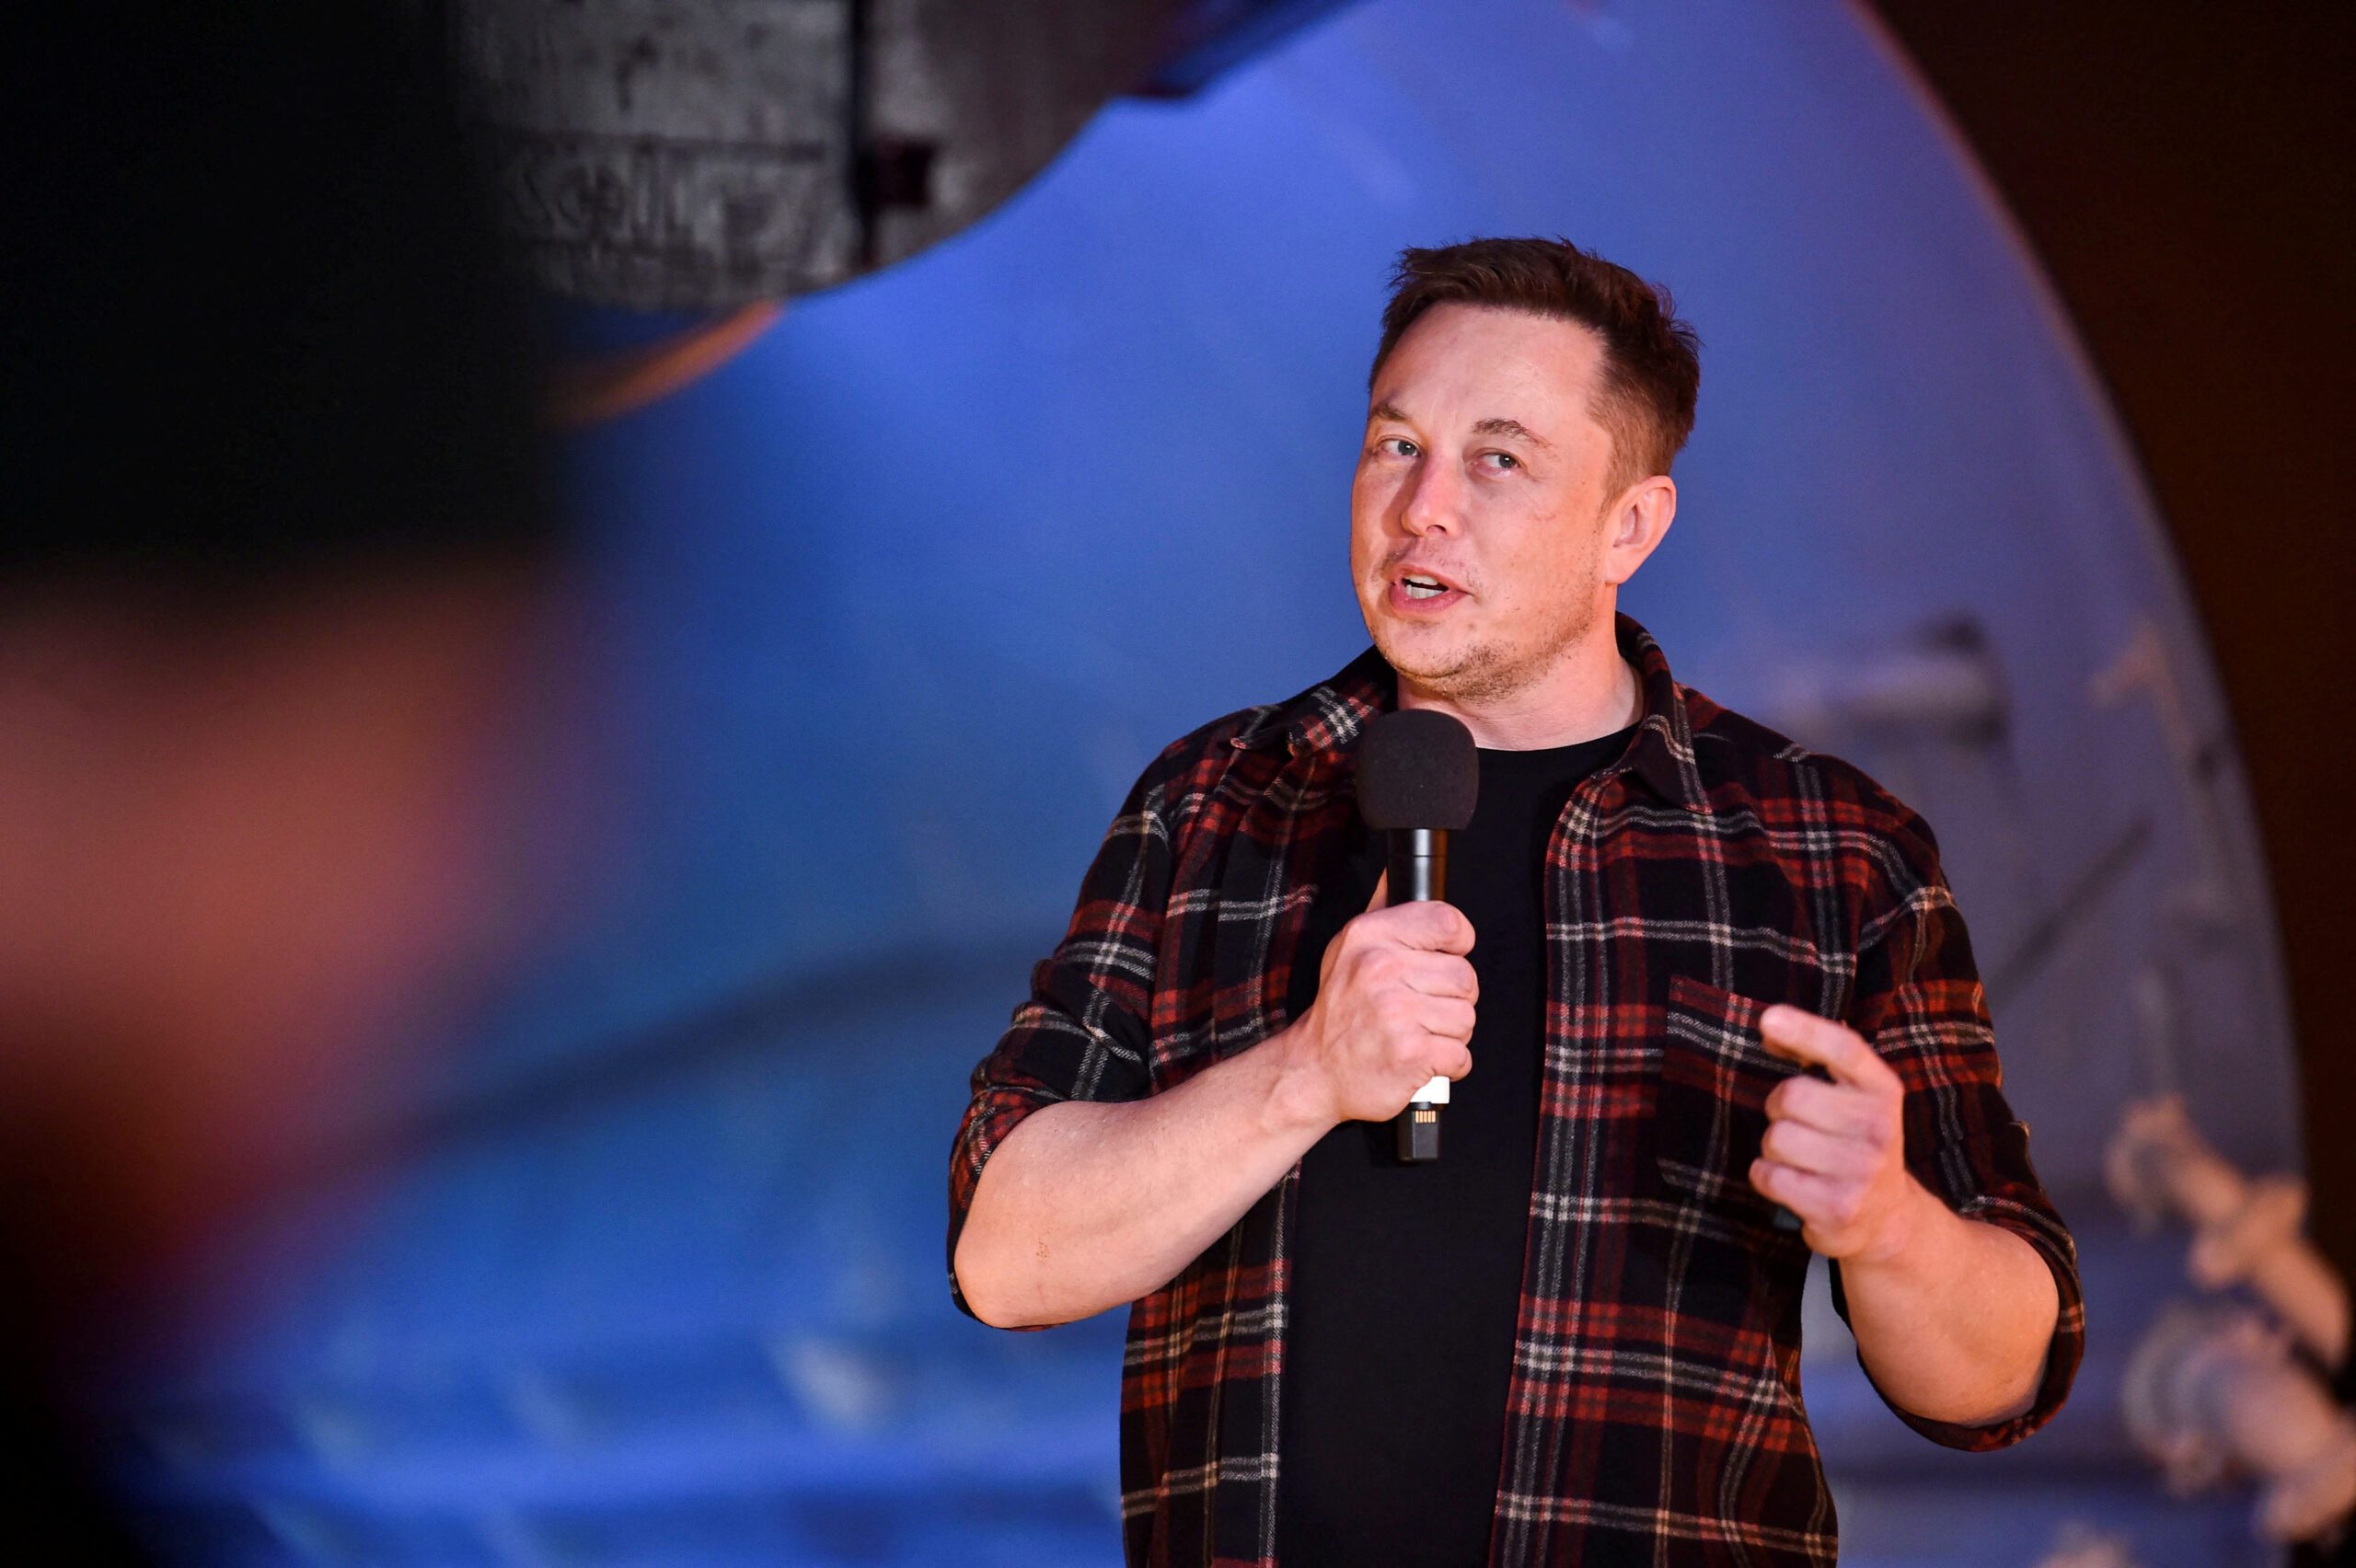 Twitter and Elon Musk: Why free speech absolutism threatens human rights